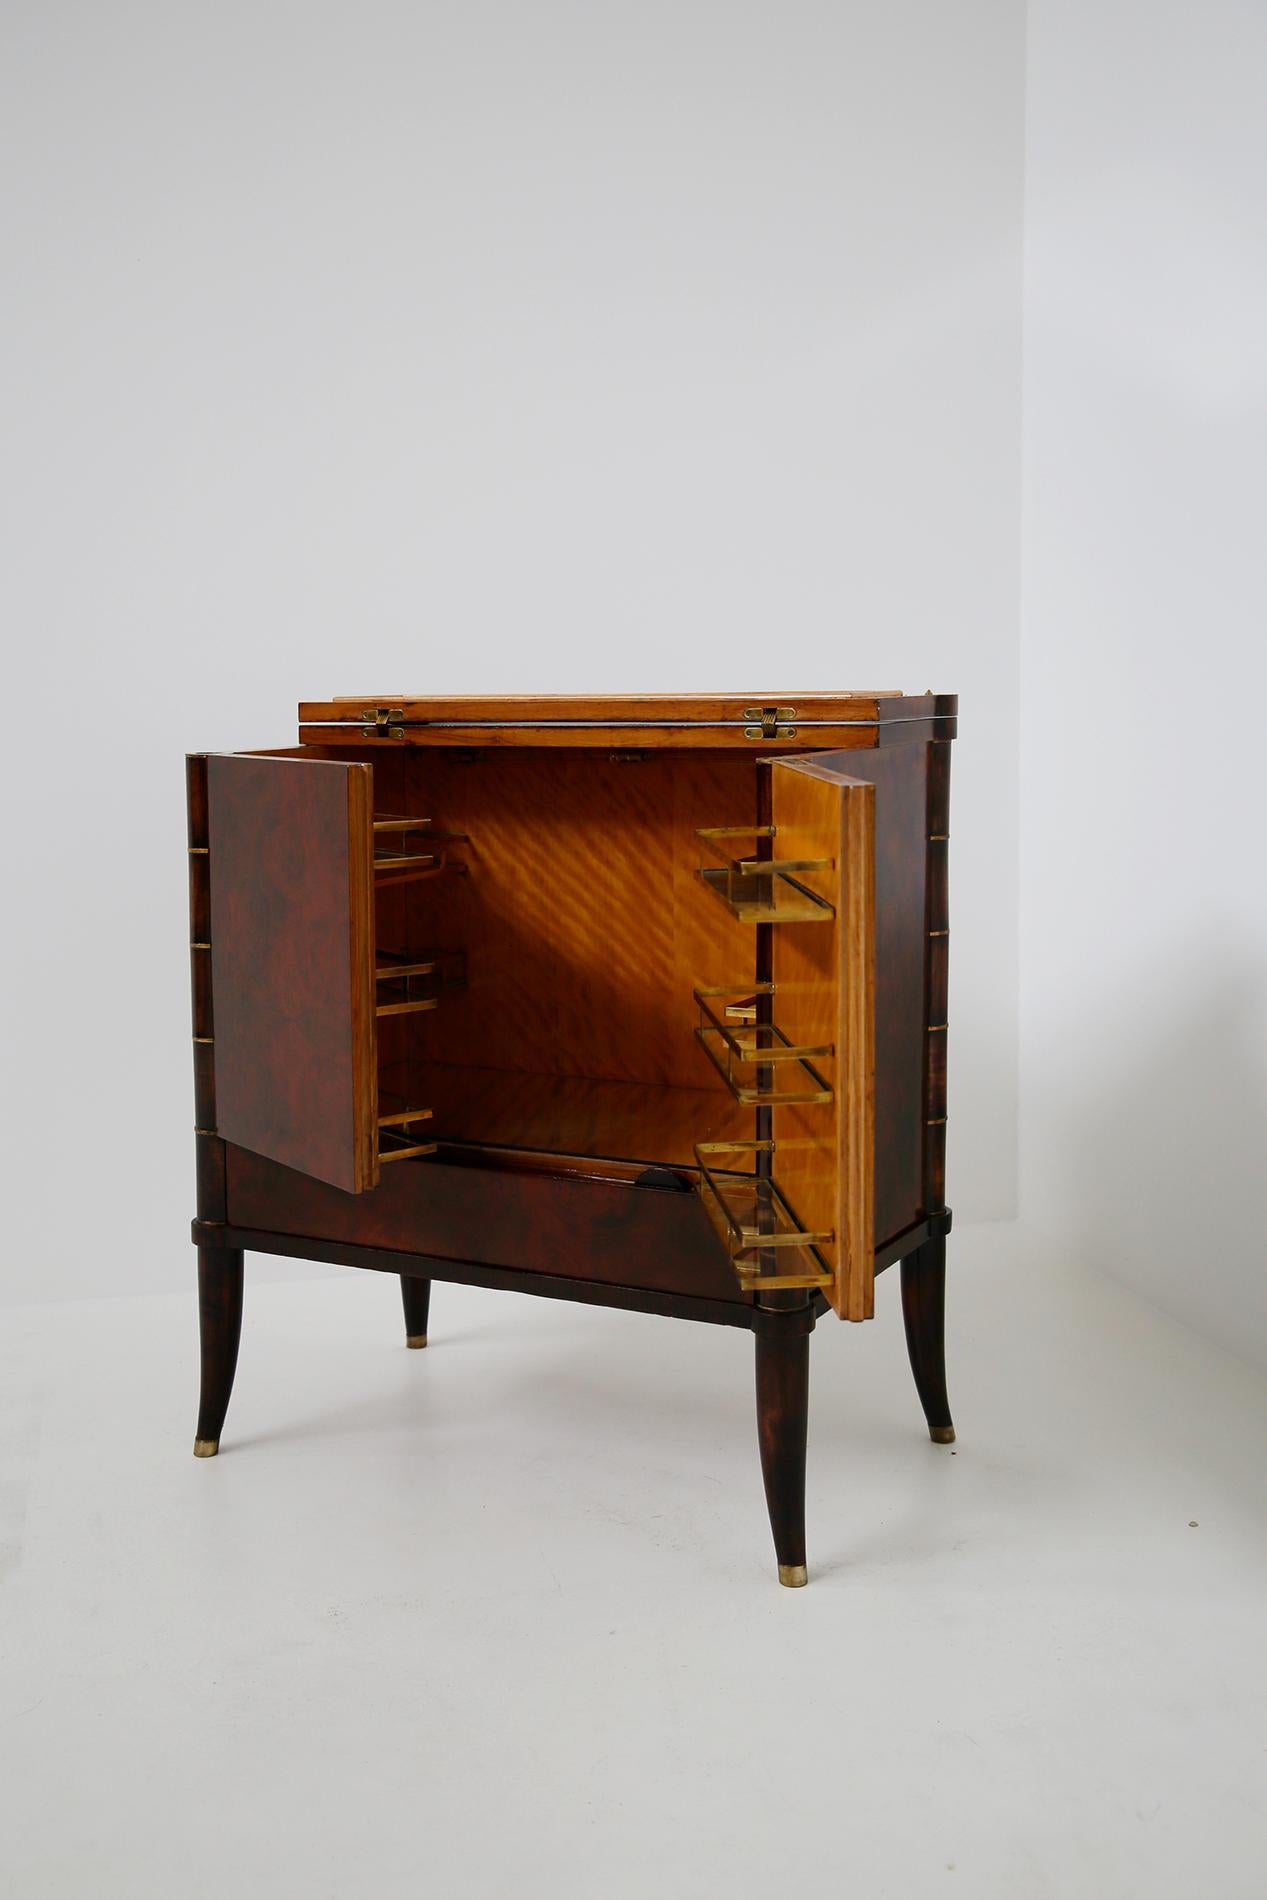 Rare and magnificent bar cabinet designed by Tomaso Buzzi, circa 1930. Verified by the Tomaso Buzzi foundation archive. The cabinet was designed on commission by a private Milanese house. The cabinet has a double hinged door. Inside we find in the